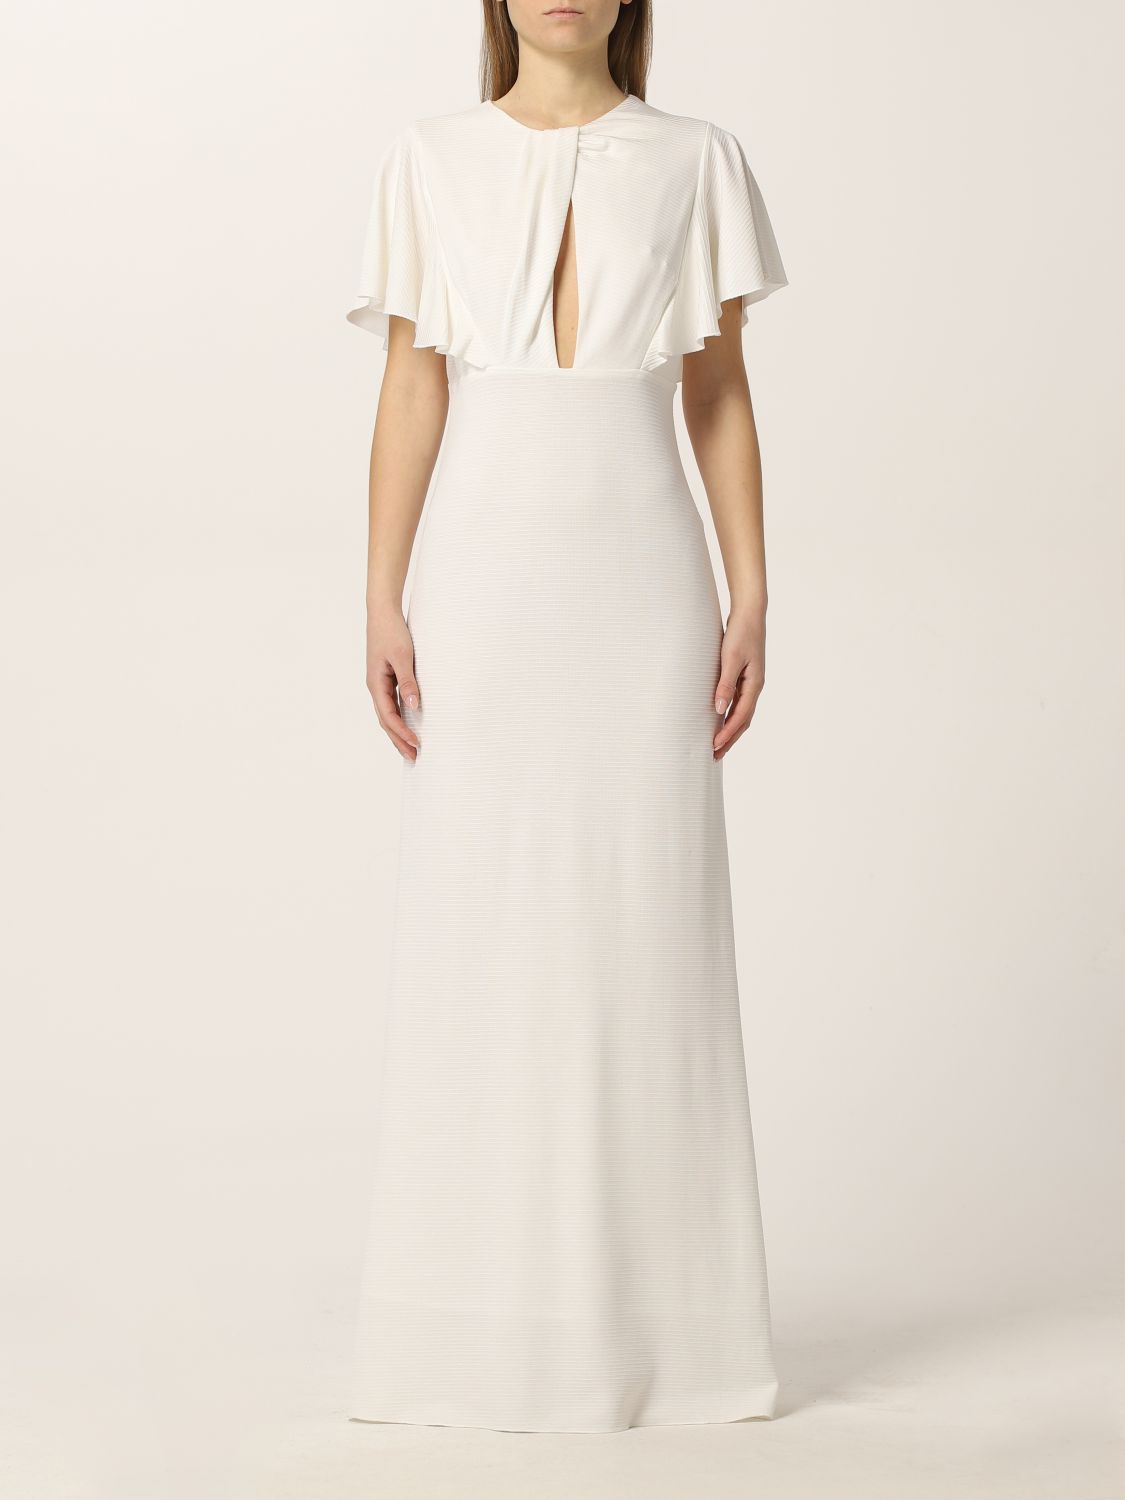 Dress Vanessa Cocchiaro: Vanessa Cocchiaro dress for woman white 1